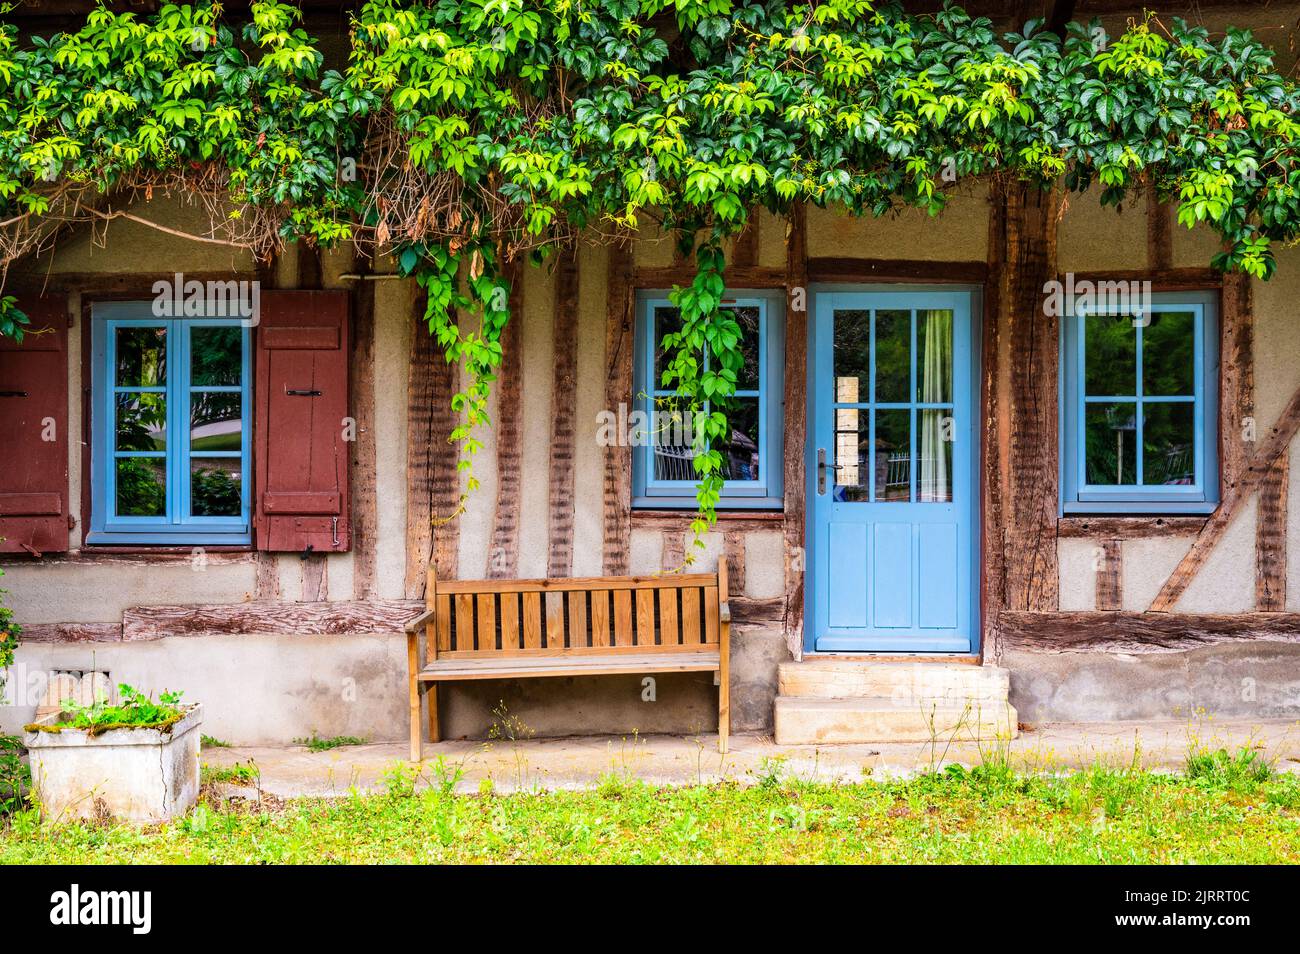 Bench in front of a rural farmhouse in La Chapelle Saint-Sauveur, Burgundy, France Stock Photo